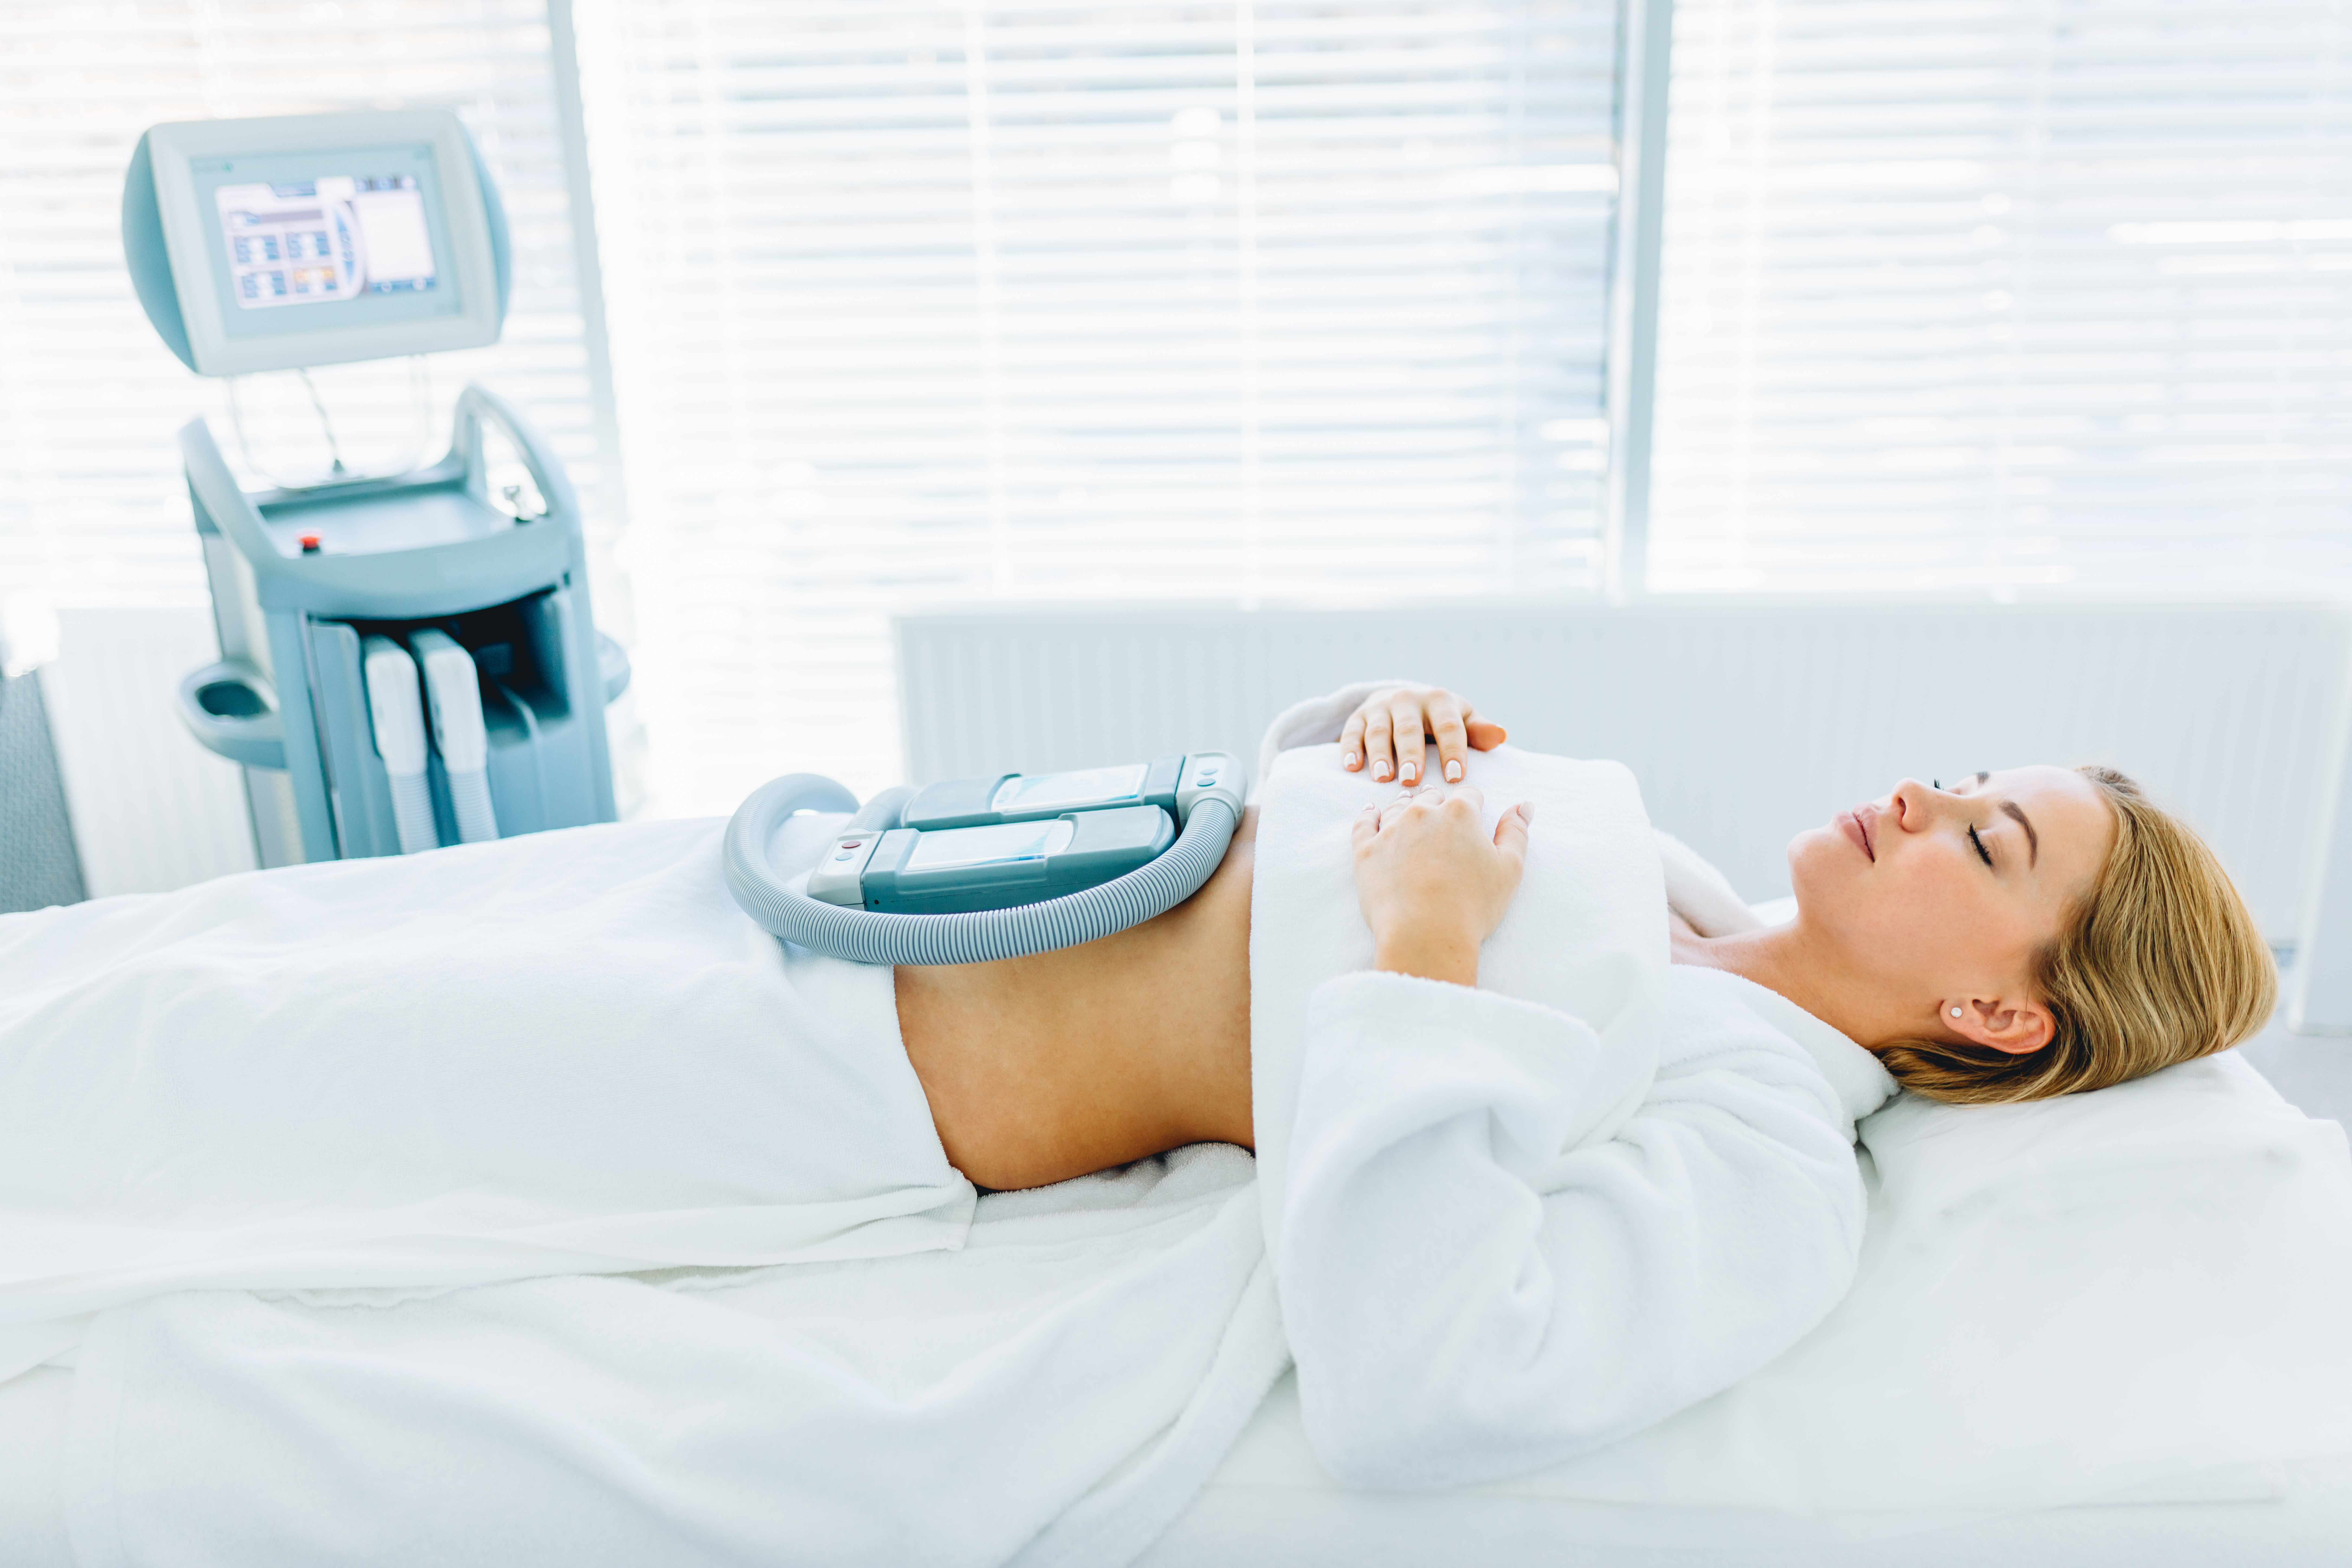 patient lies on medical table undergoing fat freezing procedure to fat reduction. Beauty vibrant massage therapy combined with crio effect gives excellent results. Body weight loss, Anti cellulite